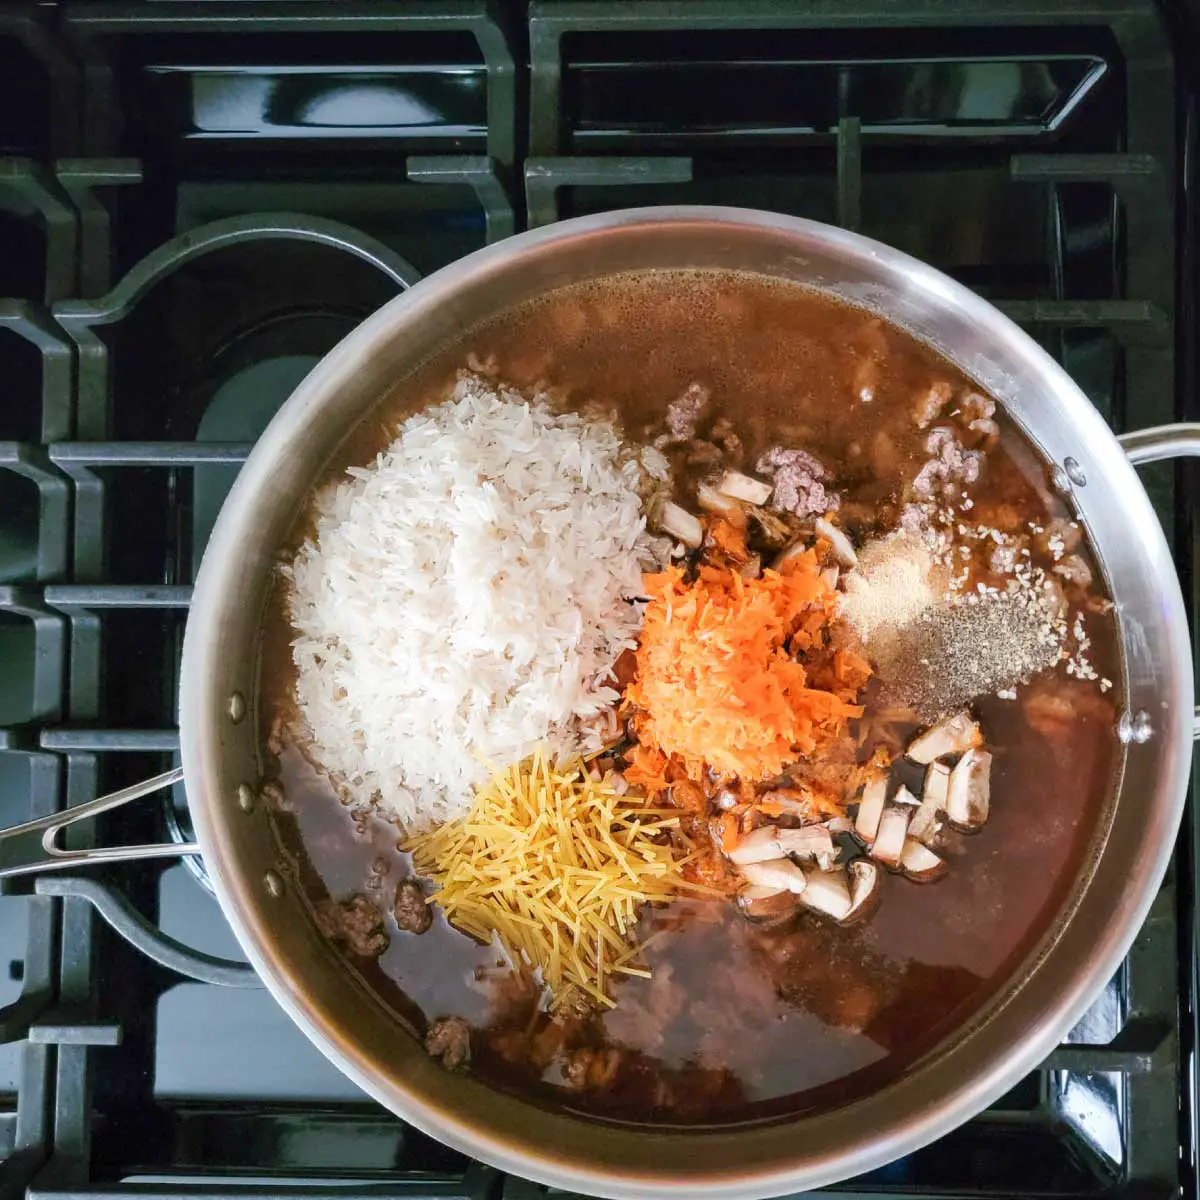 Ground beef, rice, pasta, beef broth, carrot, mushrooms and spices in a large frying pan ready to be stirred and cooked.